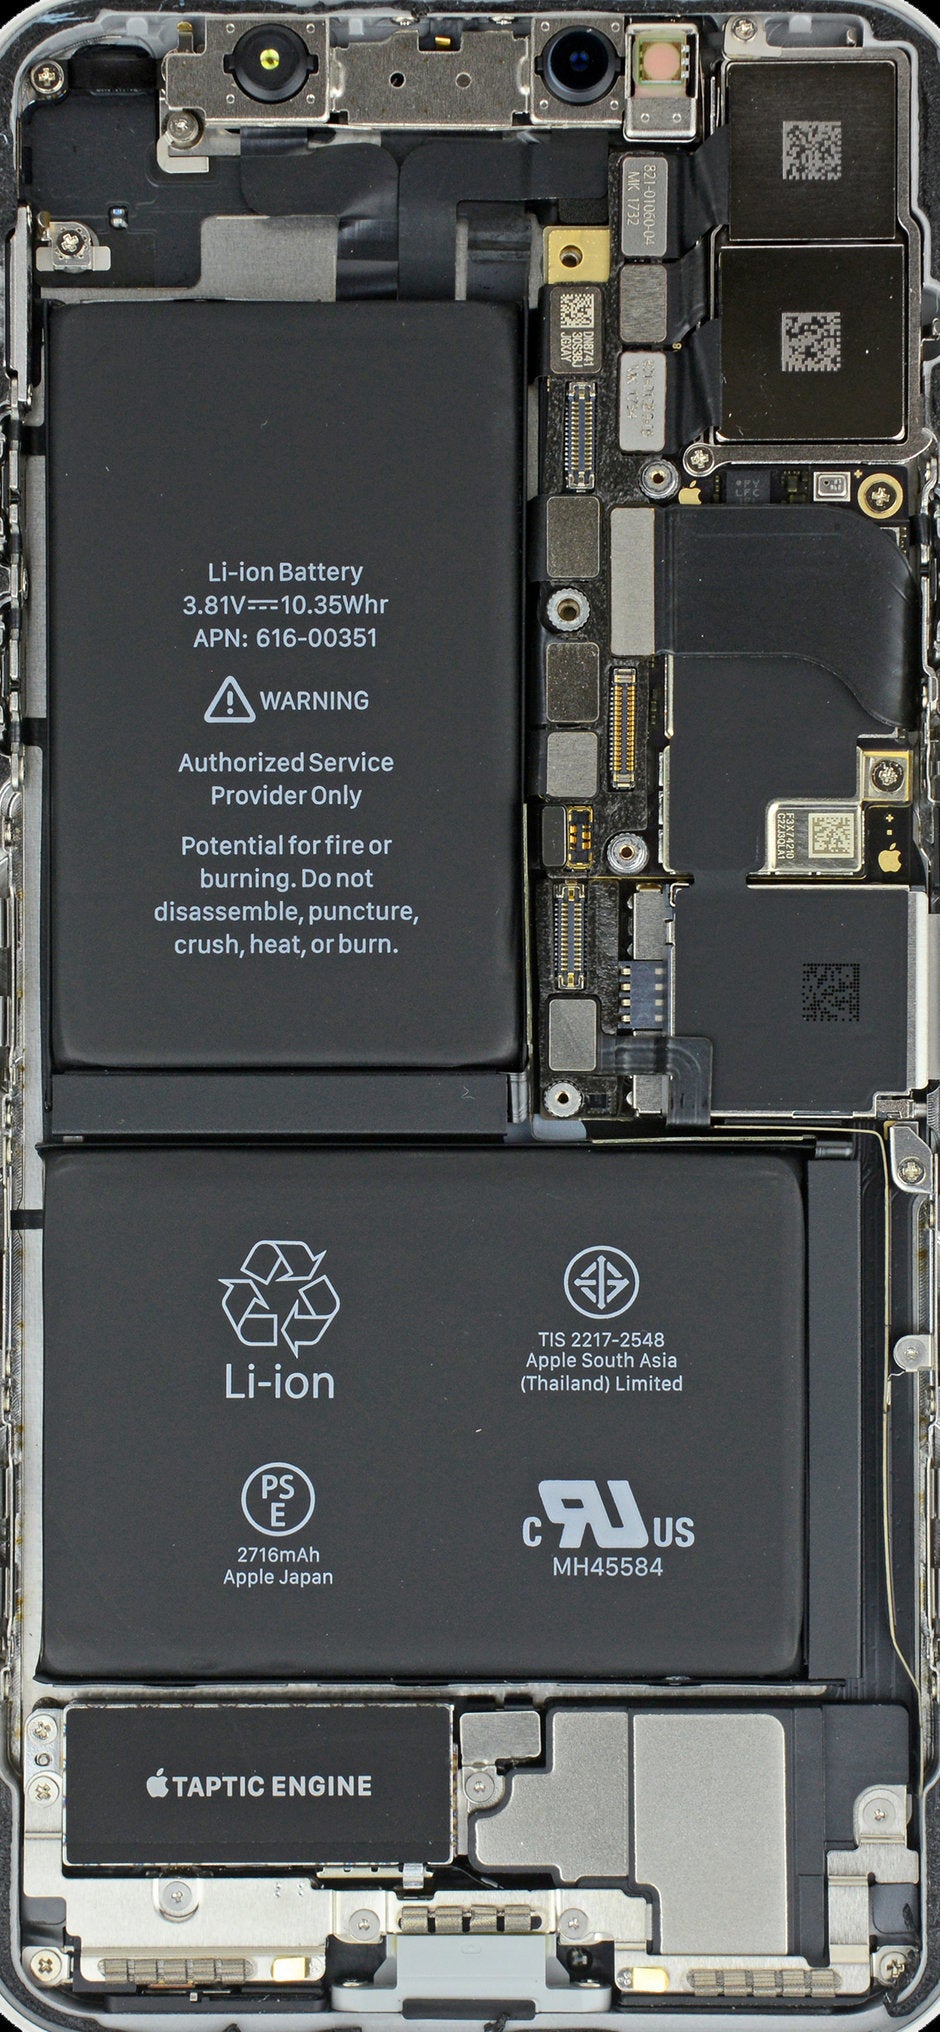 The iPhone X battery - With the iOS 12.1 update, Apple's processor throttling comes to the iPhone 8/Plus and X